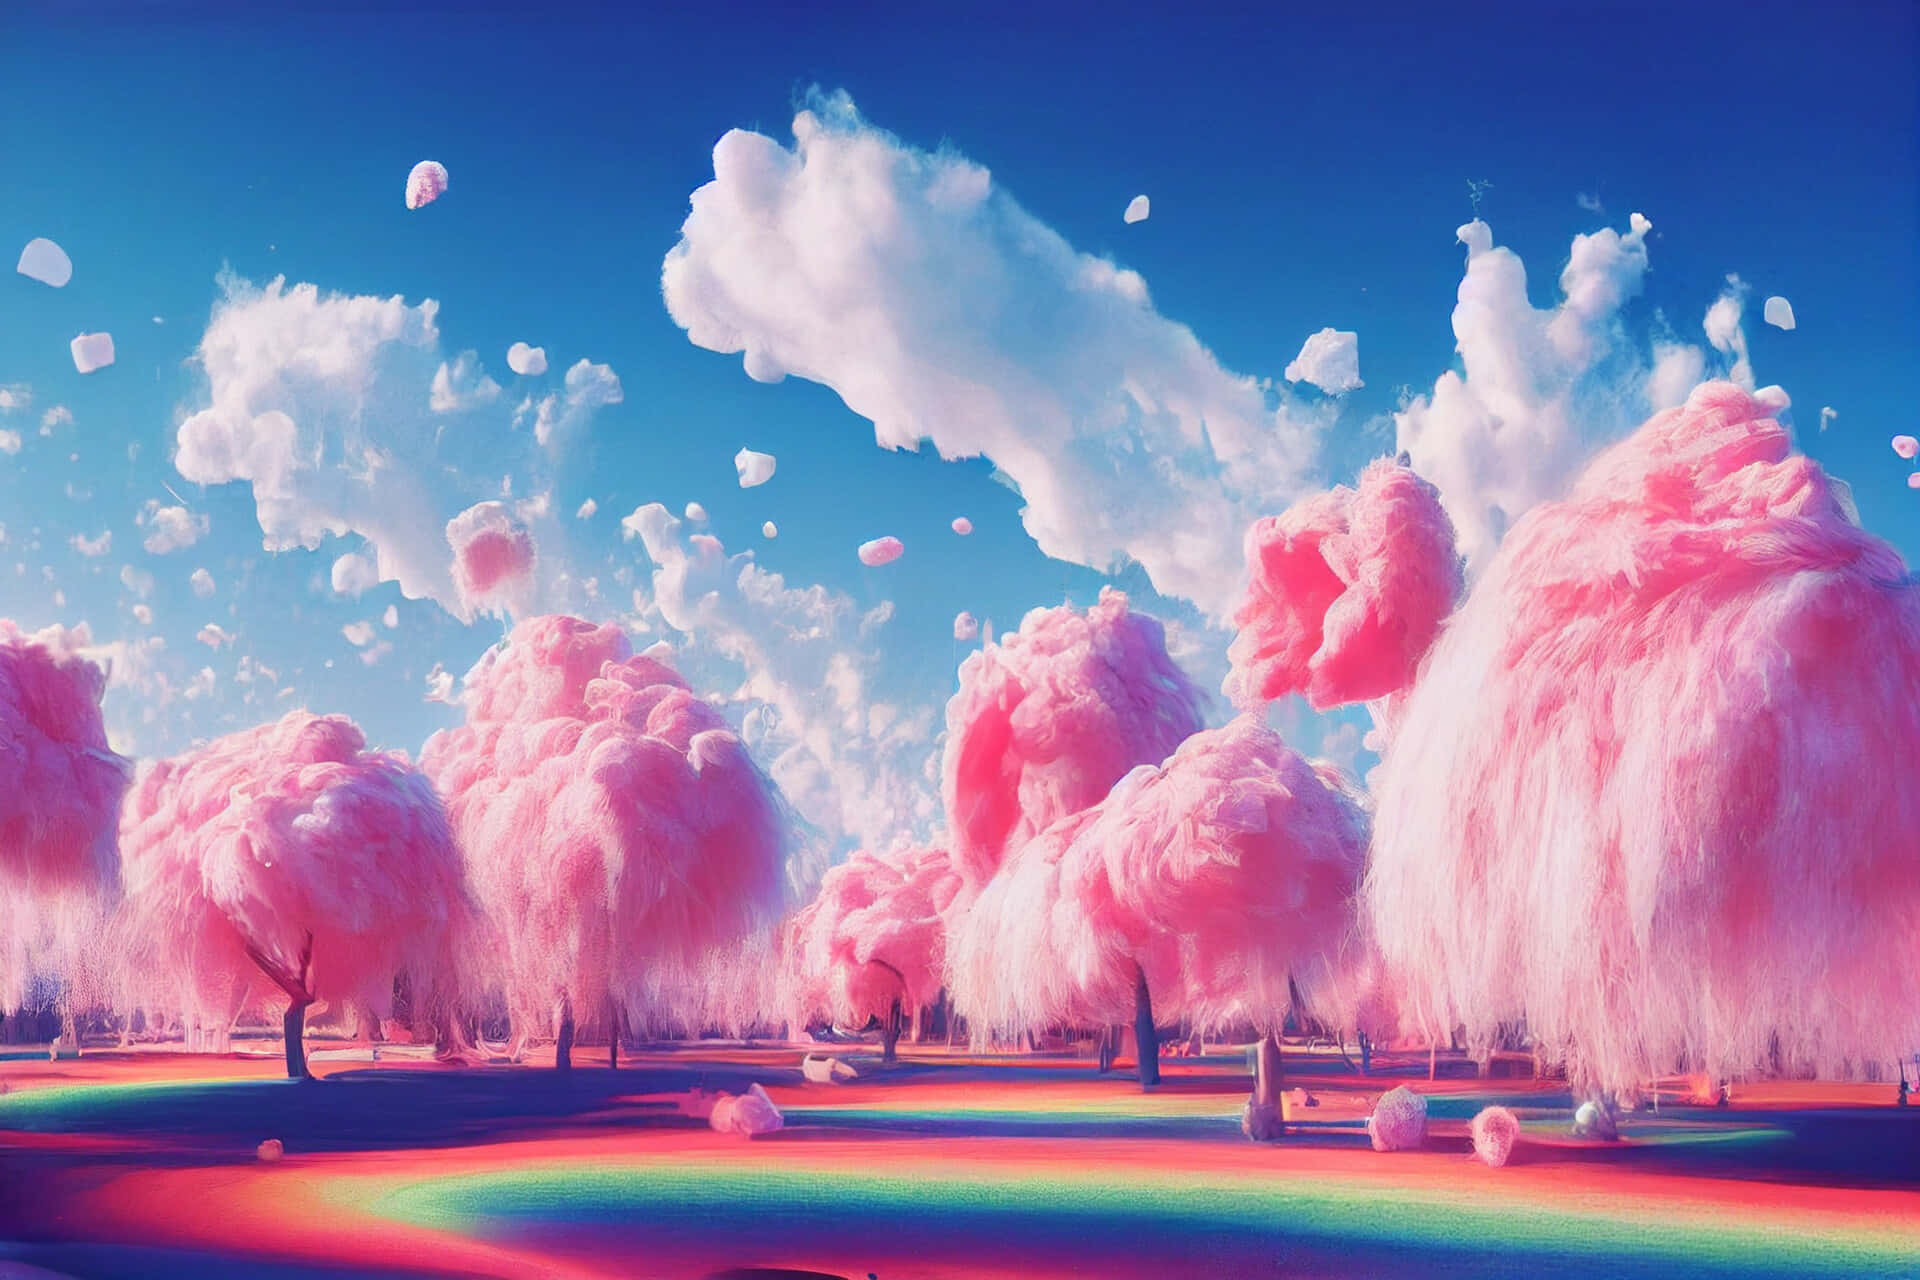 Download Trippy Aesthetic Clouds On Rainbow Ground Wallpaper